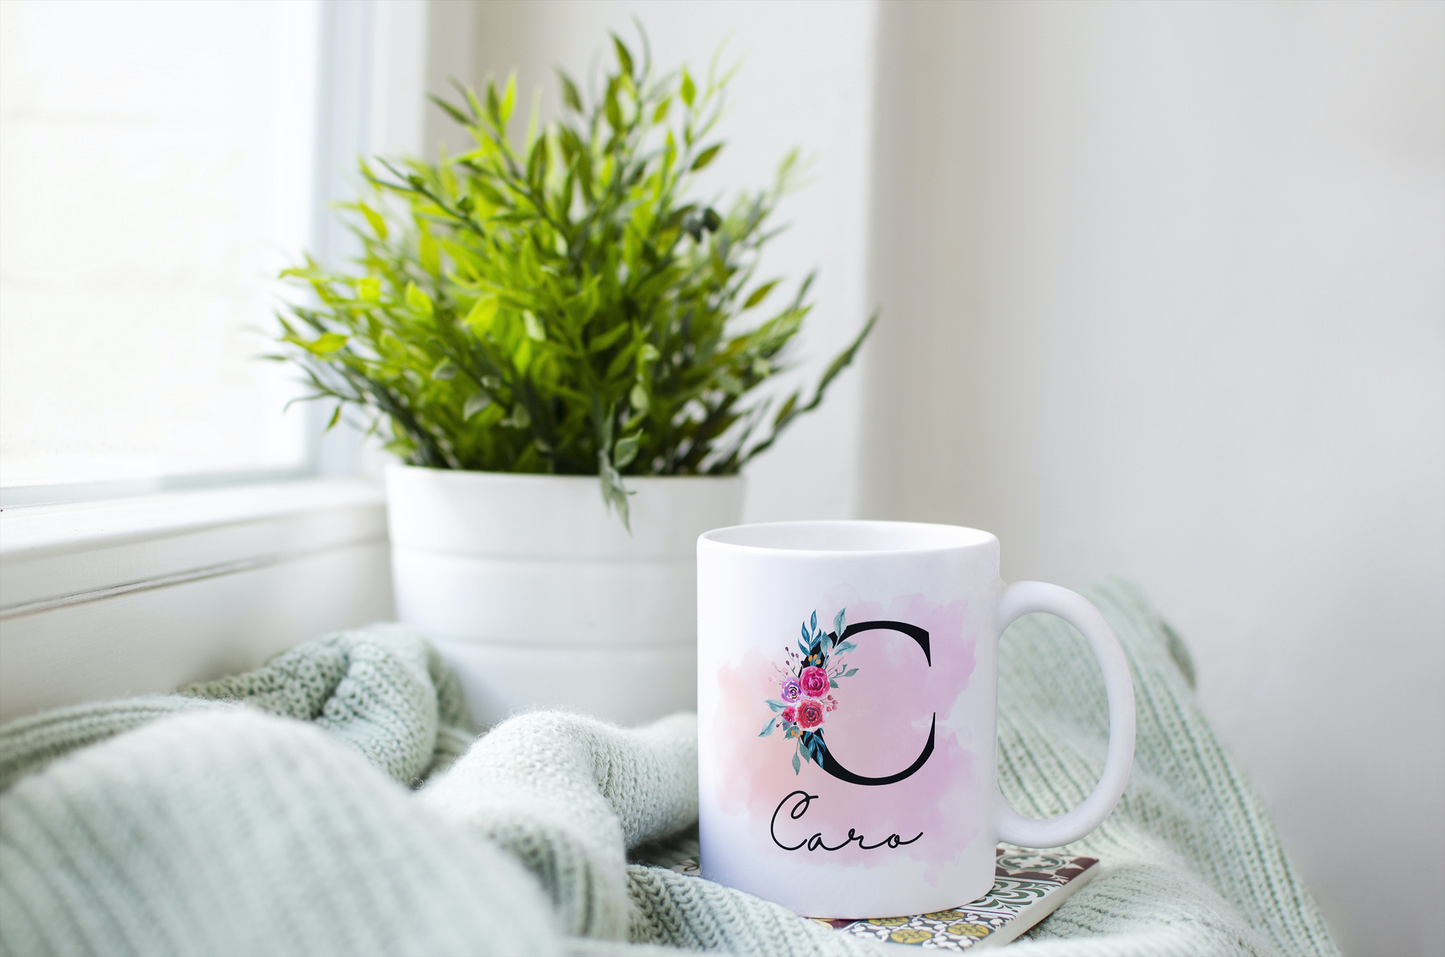 Cup with personalized initial and name/gift for girlfriend/gift idea/gift favorite person/gift best friend